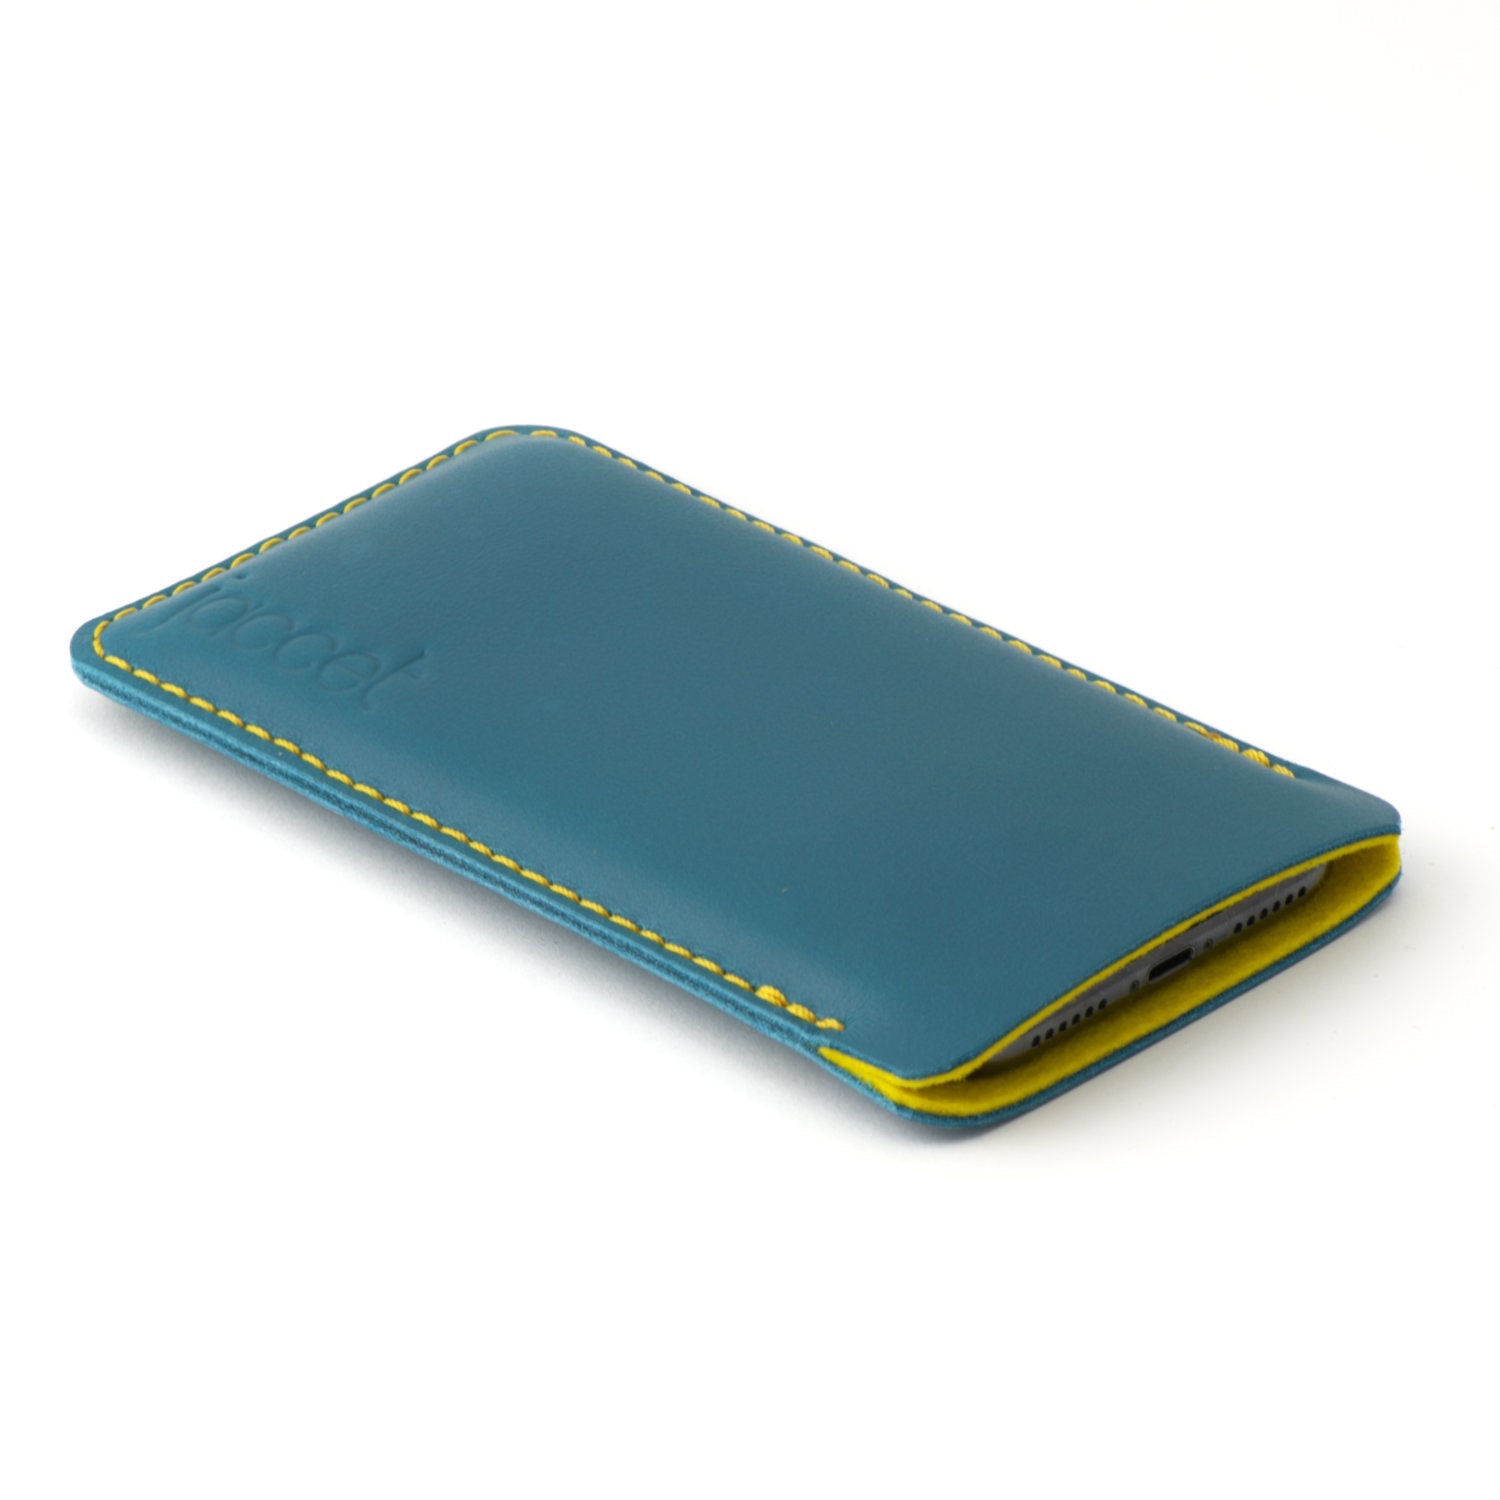 Full-grain leather OPPO sleeve - Turquoise leather with yellow wolvilt - 100% handmade